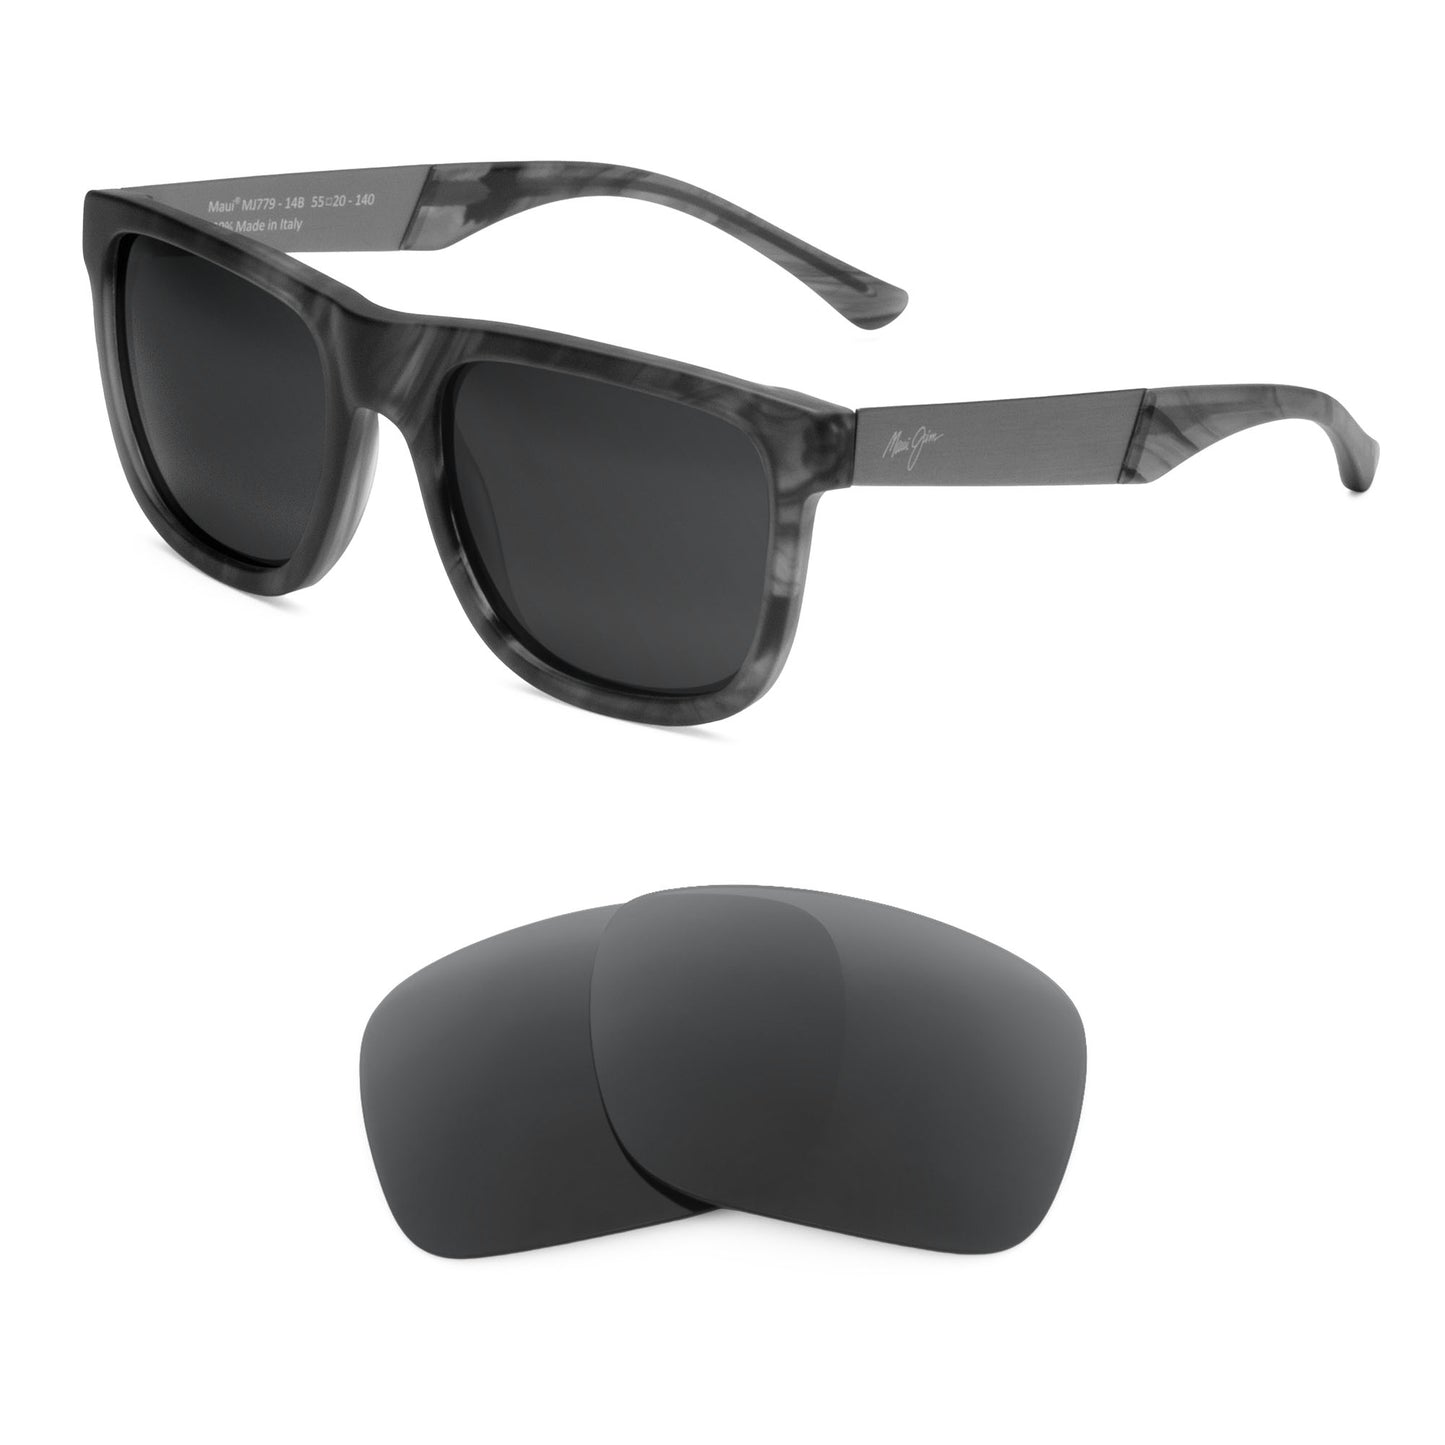 Maui Jim Talk Story MJ779 sunglasses with replacement lenses